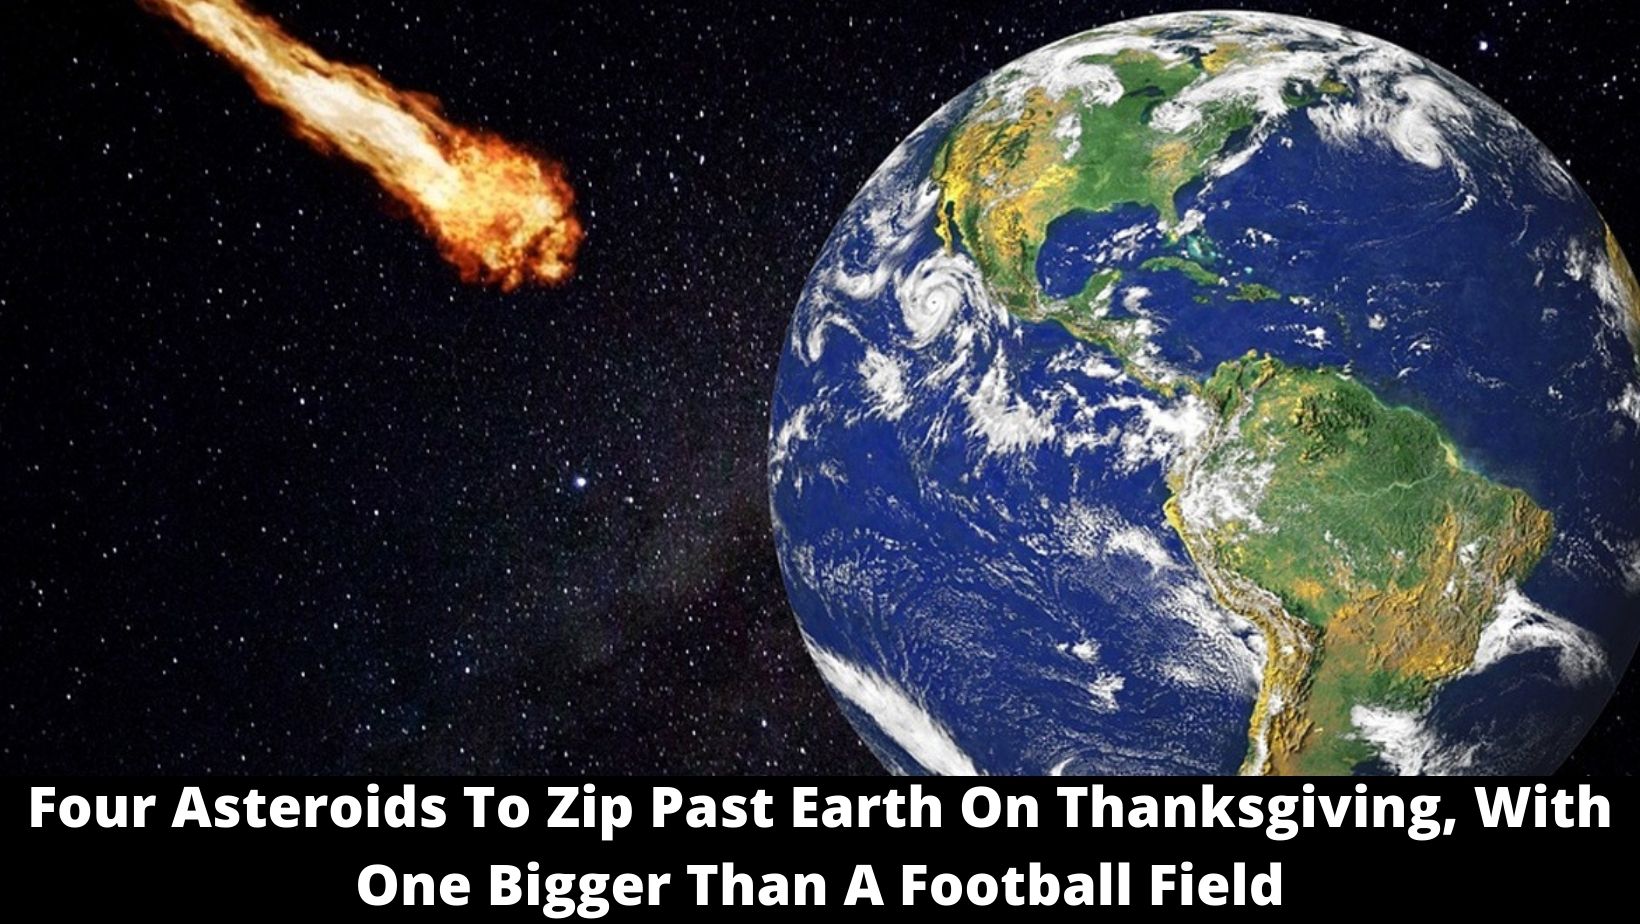 Four Asteroids To Zip Past Earth On Thanksgiving, With One Bigger Than A Football Field